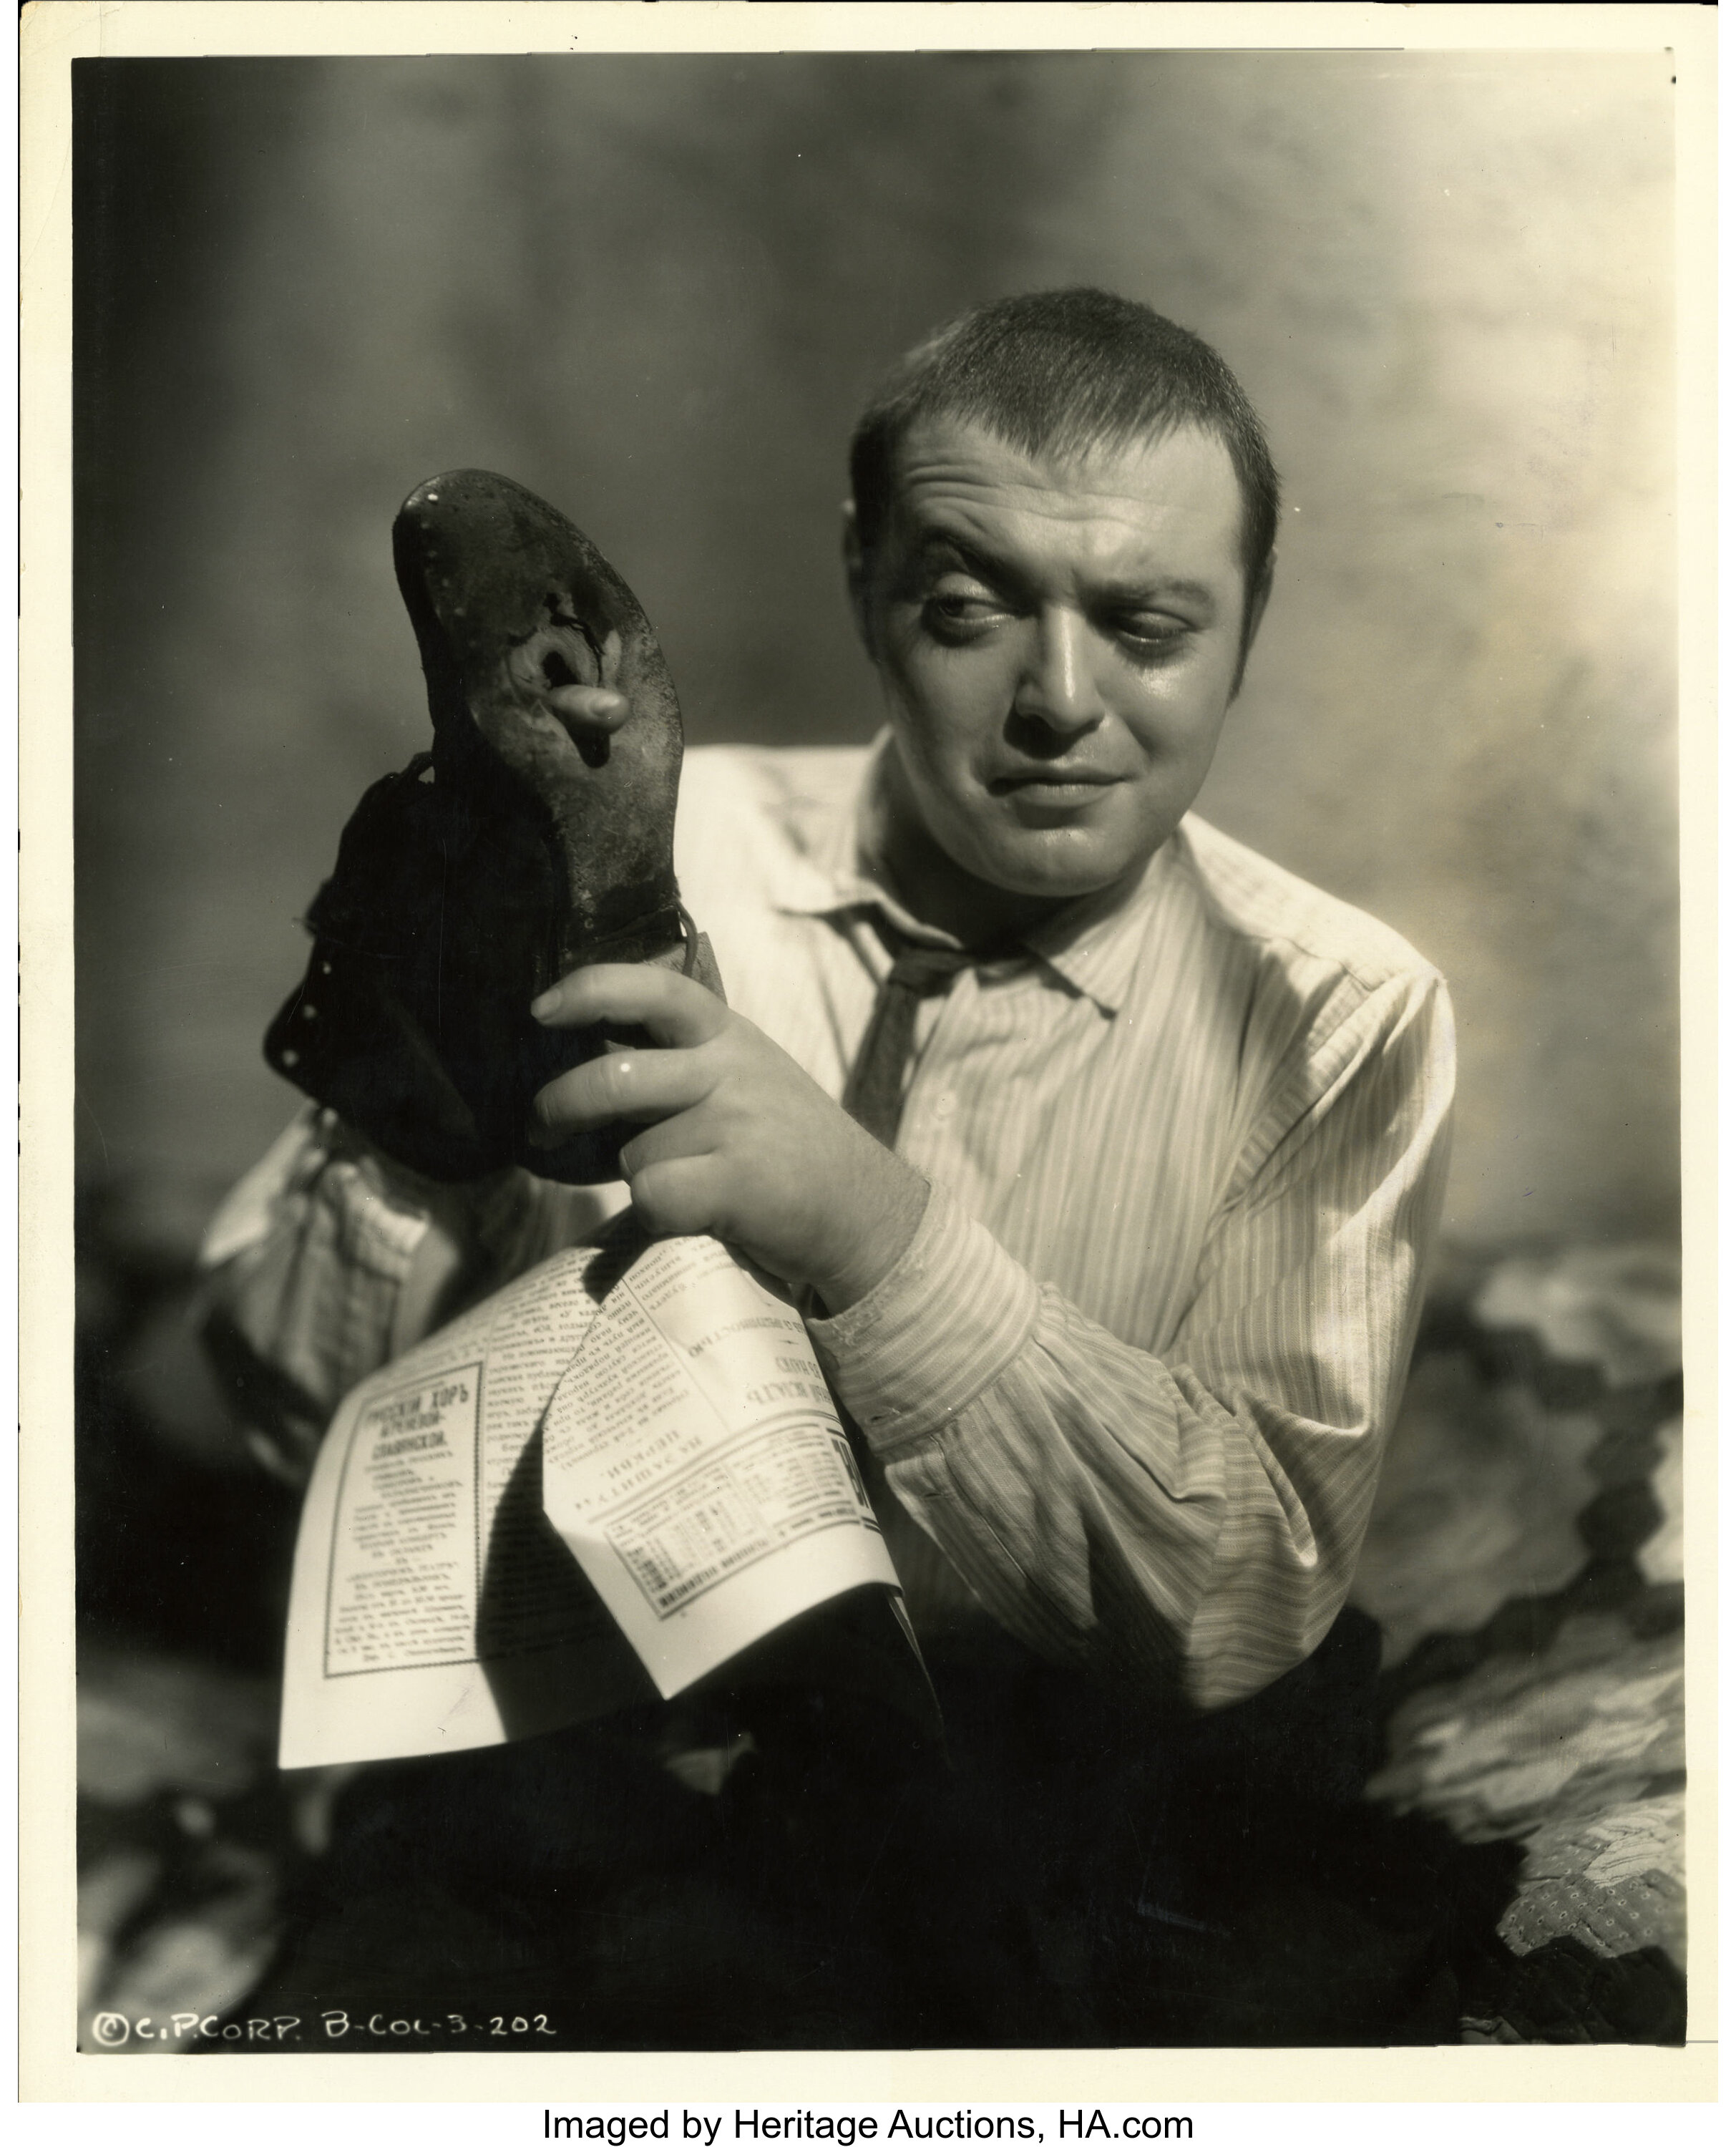 Peter Lorre In Crime And Punishment Publicity Still By Irving Lot 29512 Heritage Auctions